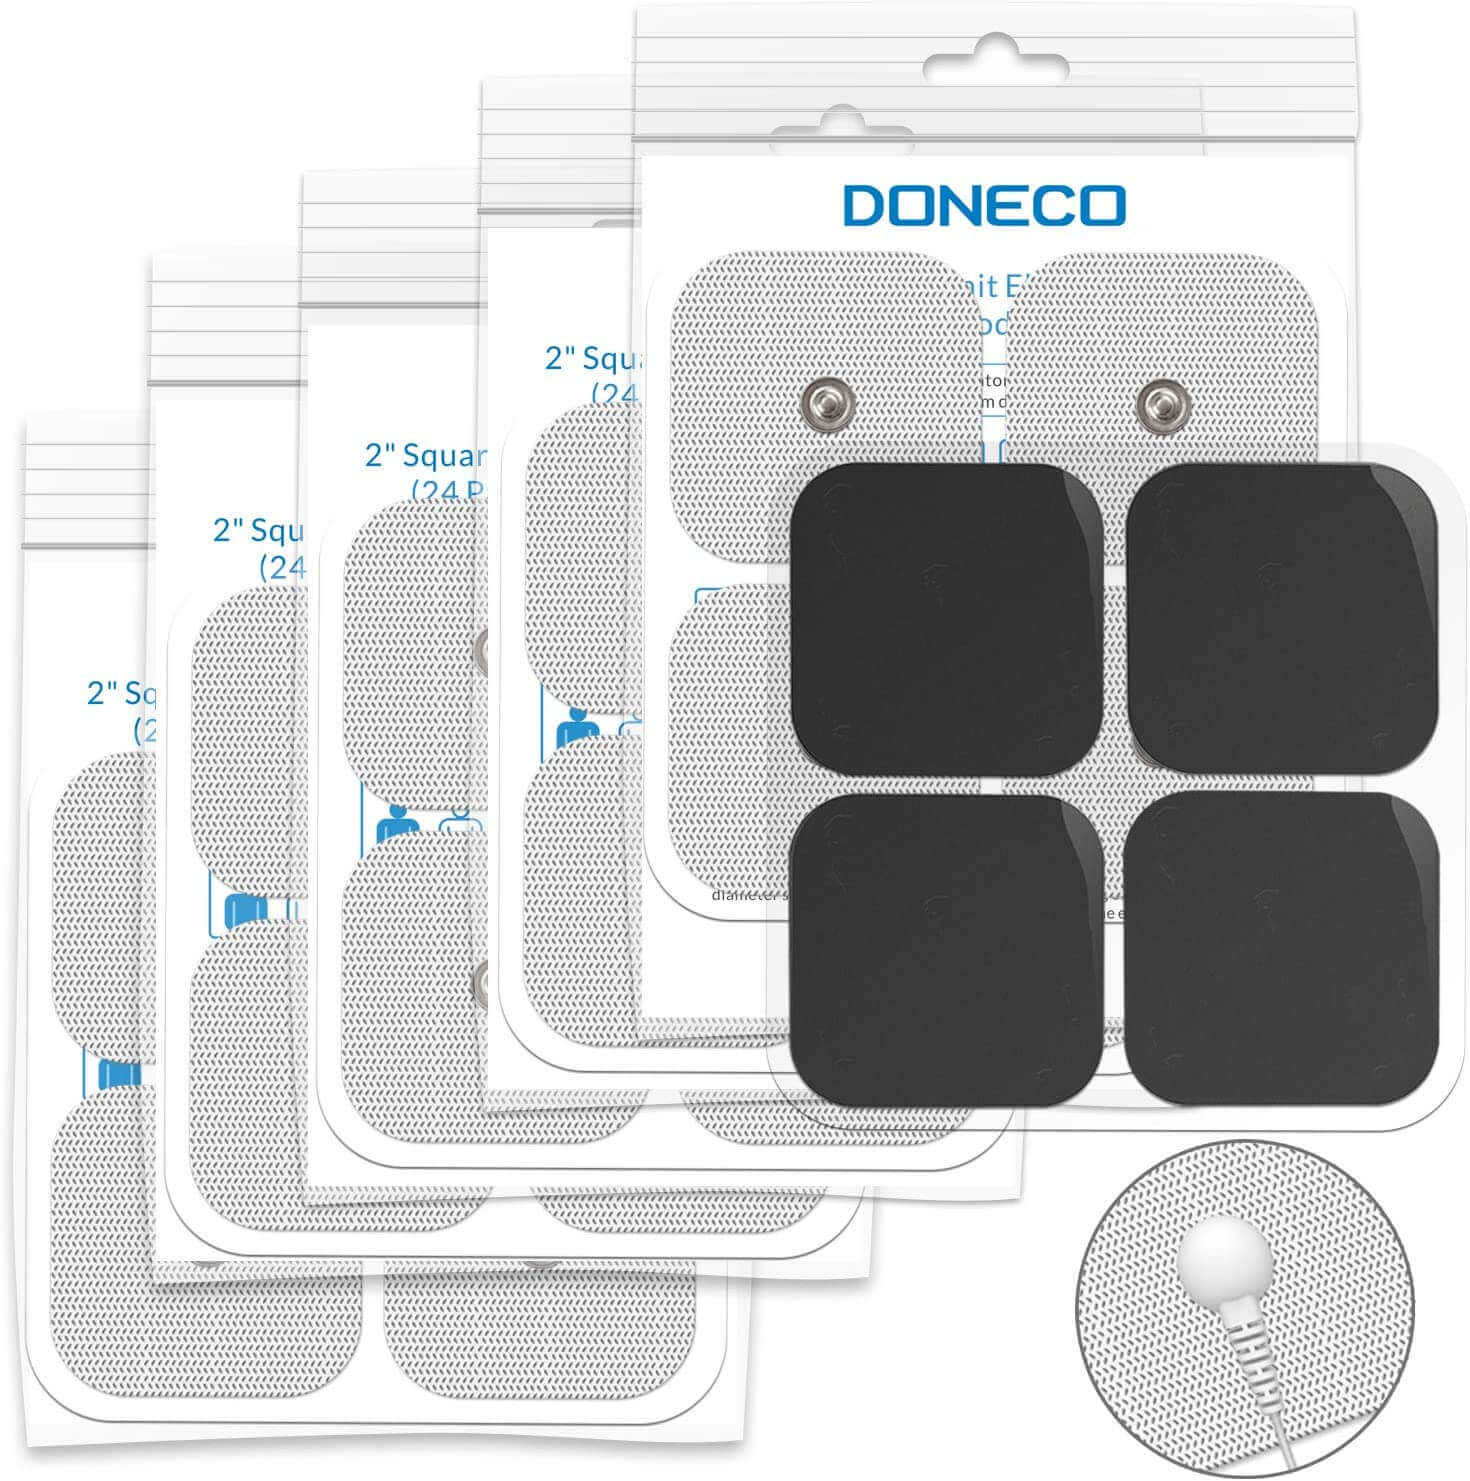 https://www.mydoneco.com/electrode-pads/snap-on-pads-24-pcs-for-tens-therapy/doneco-electrodes-pads-2in-square-tens-unit-snap-on-pads-24-pcs-for-tens-therapy.jpg